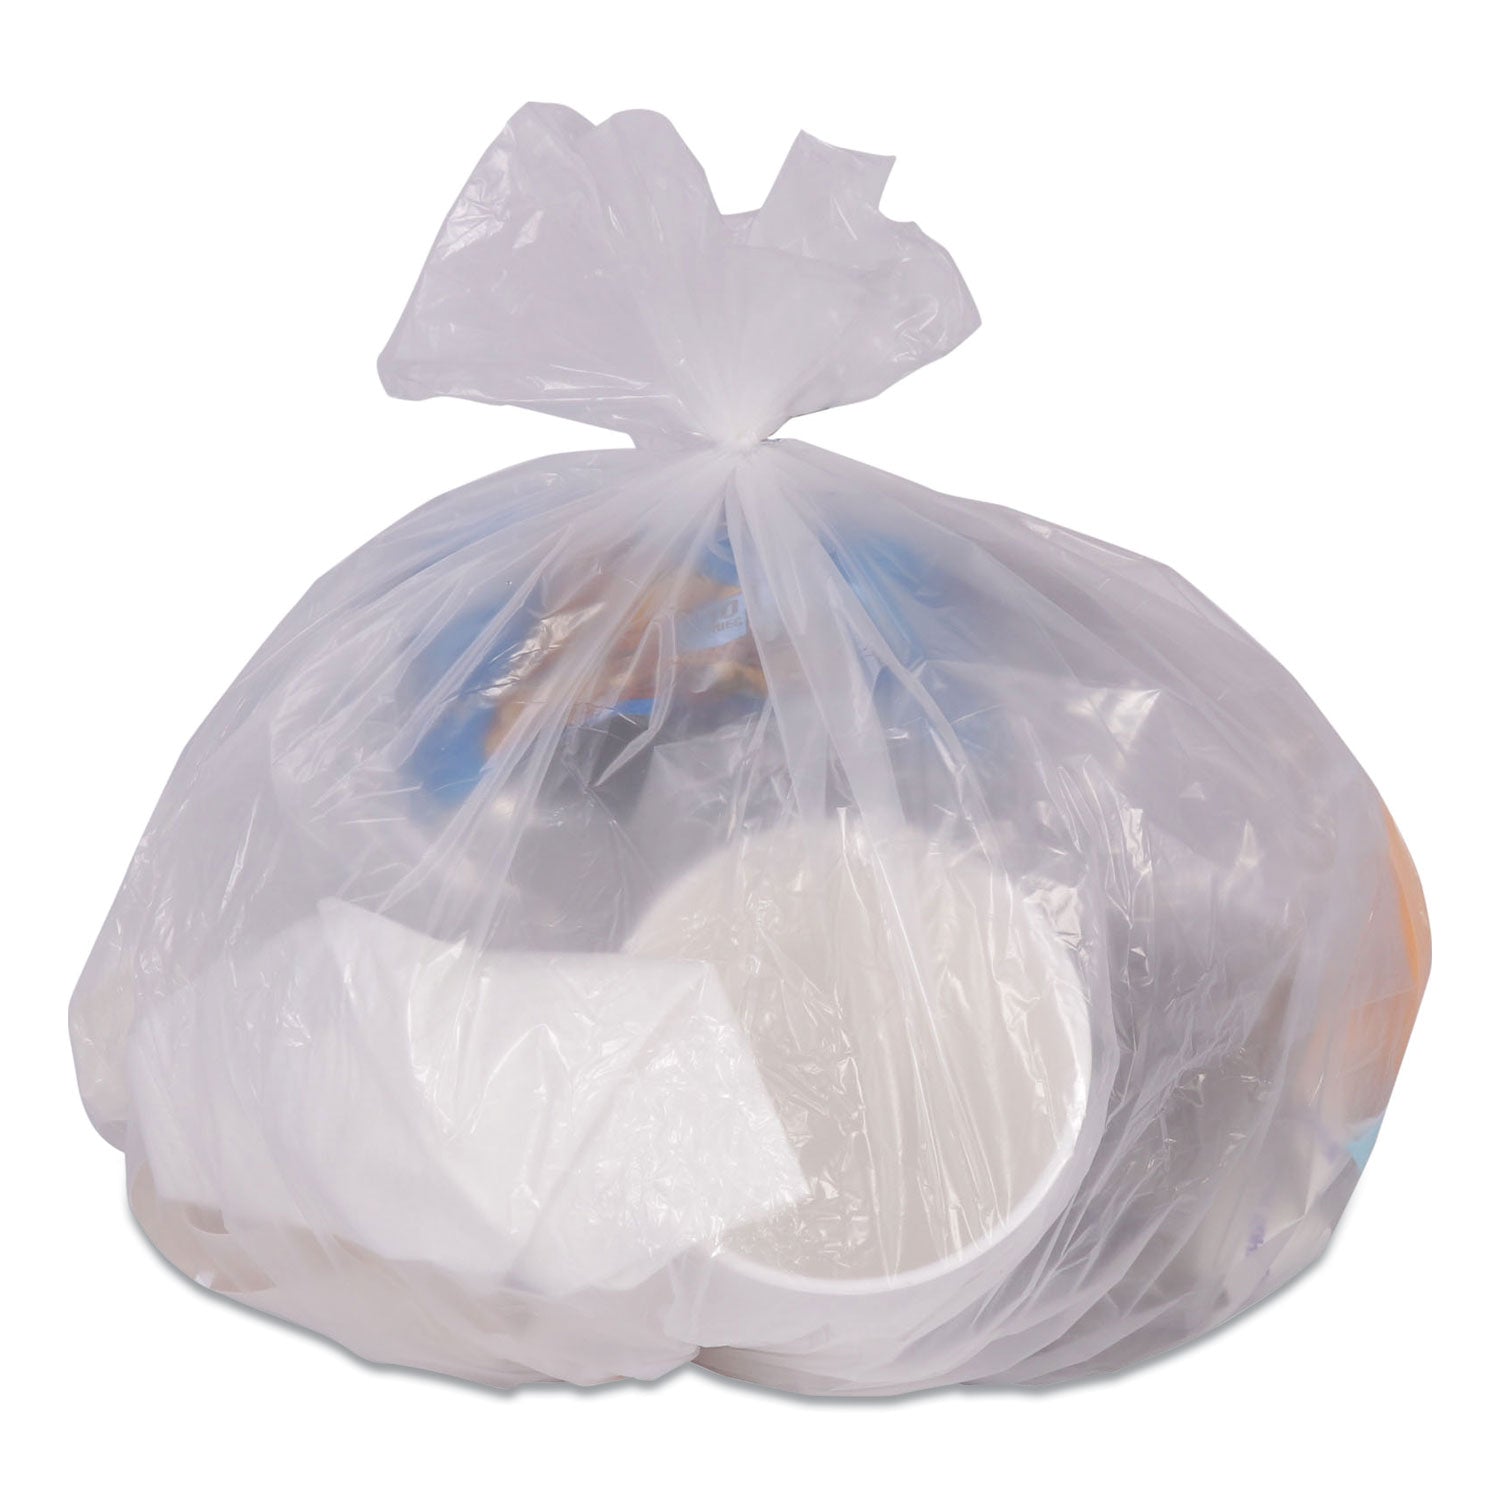 high-density-can-liners-10-gal-8-mic-24-x-24-natural-50-bags-roll-20-rolls-carton_cwz275497 - 1